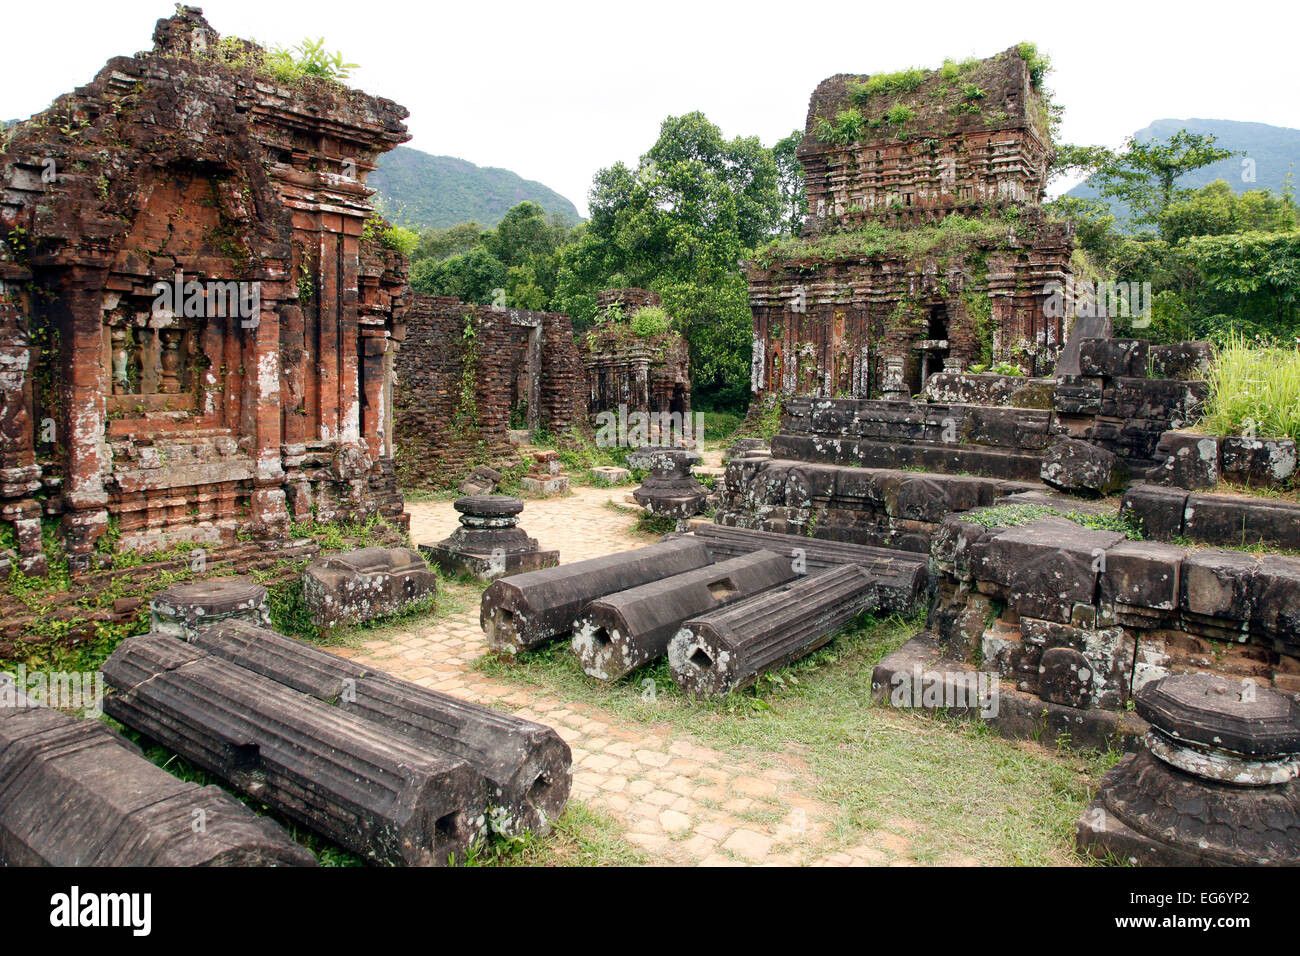 My Son Temple of the Cham, Vietnam. Stock Photo